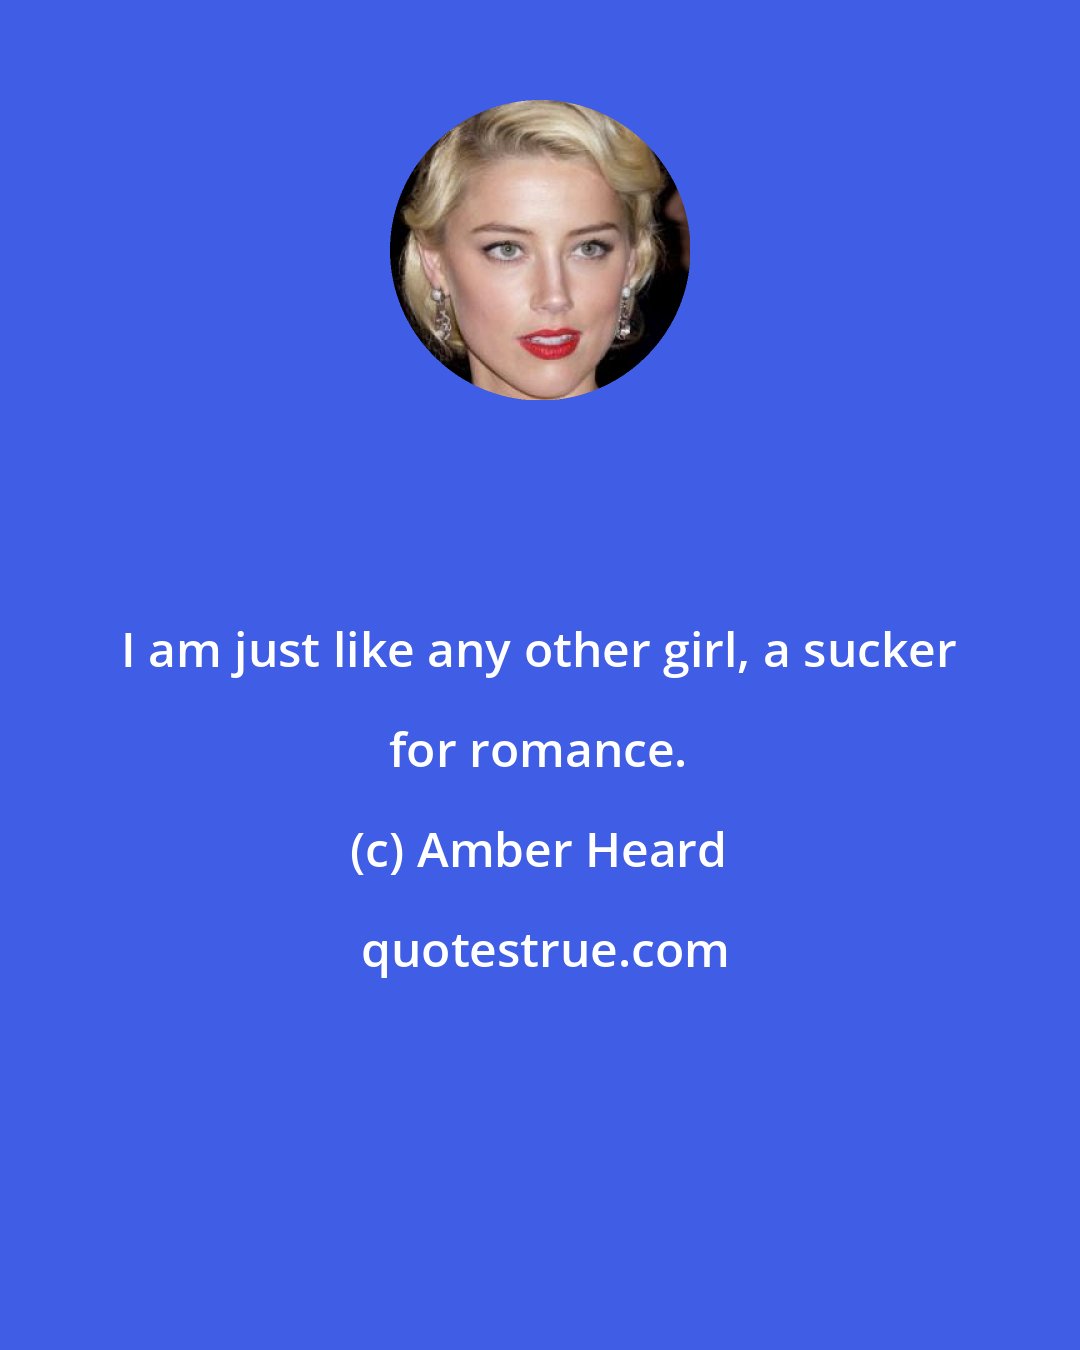 Amber Heard: I am just like any other girl, a sucker for romance.